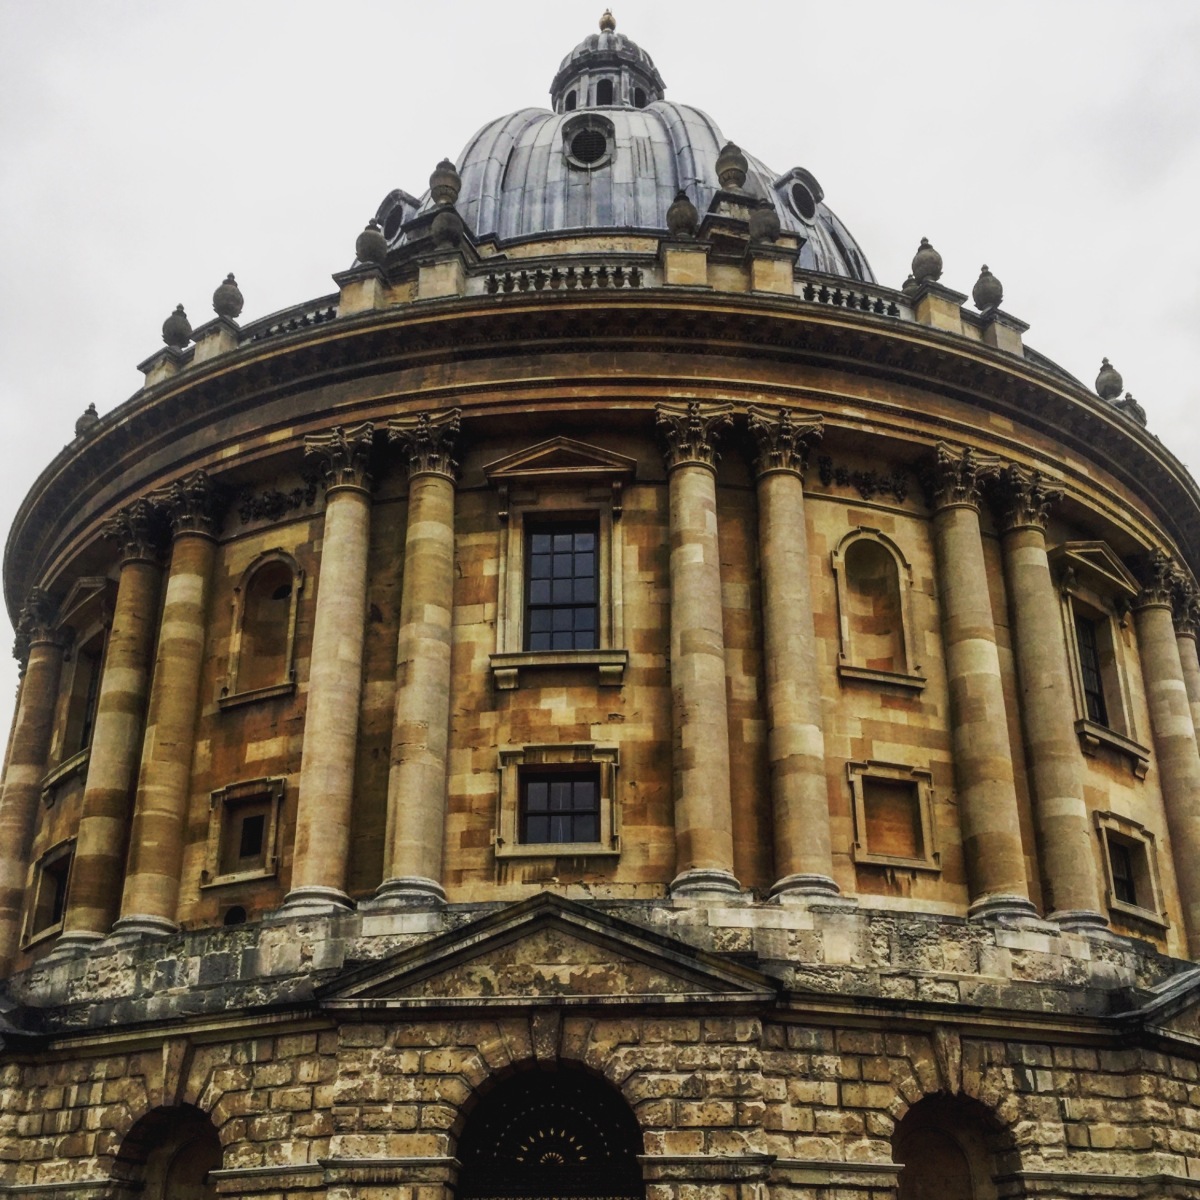 48 hours in Oxford